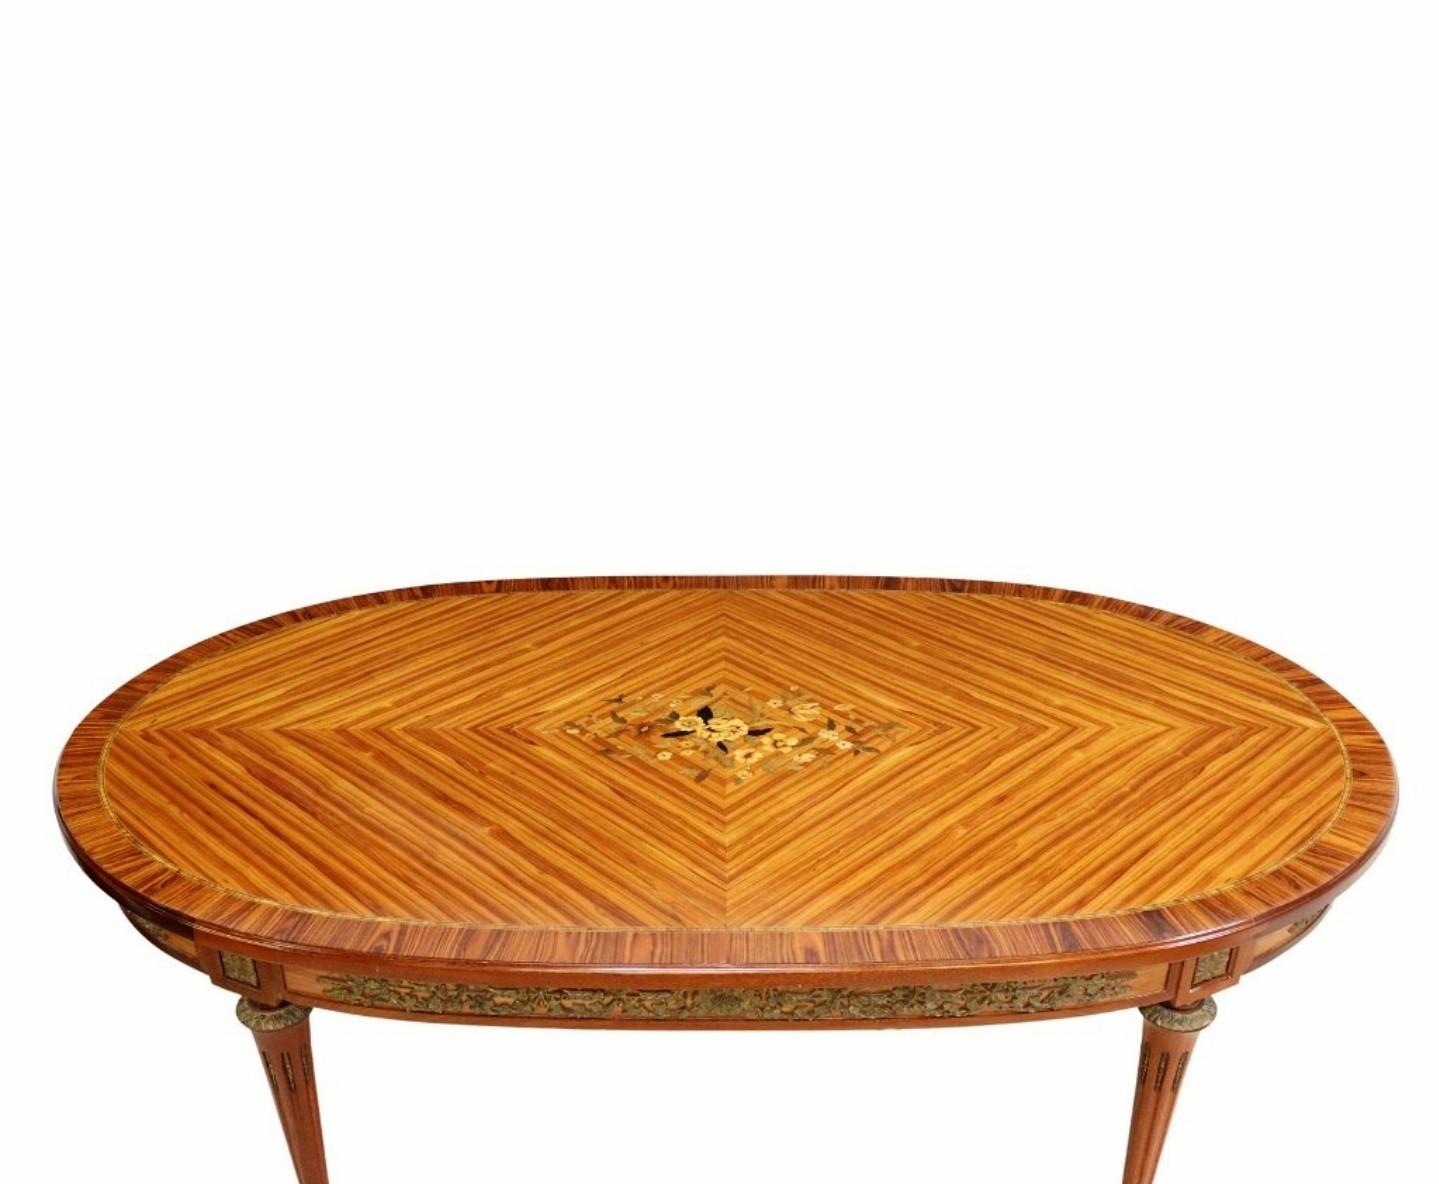 Add refined elegant warmth and Parisian sophistication to your dining room with this visually striking vintage, circa 1960s, Louis XVI style rosewood mahogany marquetry dining table in the manner of luxury designer Jean-Pierre Ehalt.

Exquisitely